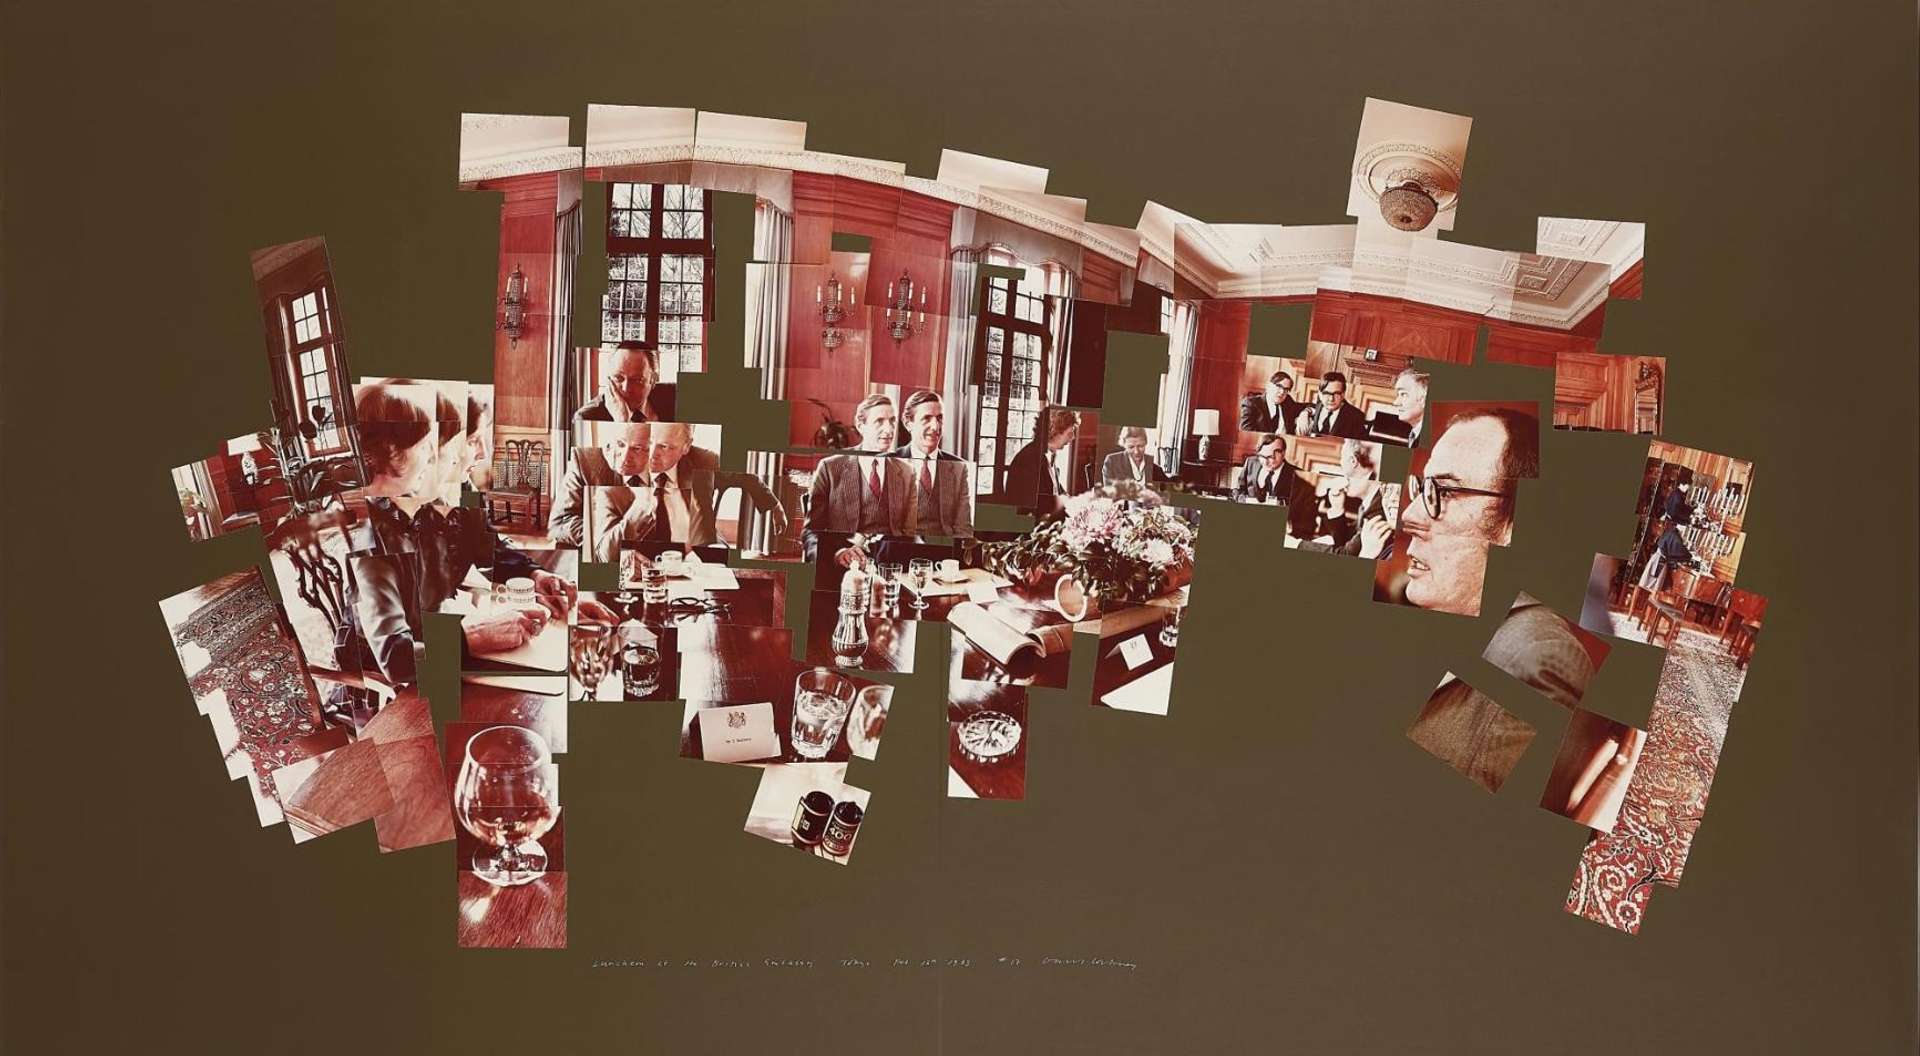 David Hockney’s Luncheon At The British Embassy, Tokyo, February 16th 1983. A photographic print of a collage of an interior dining room. 